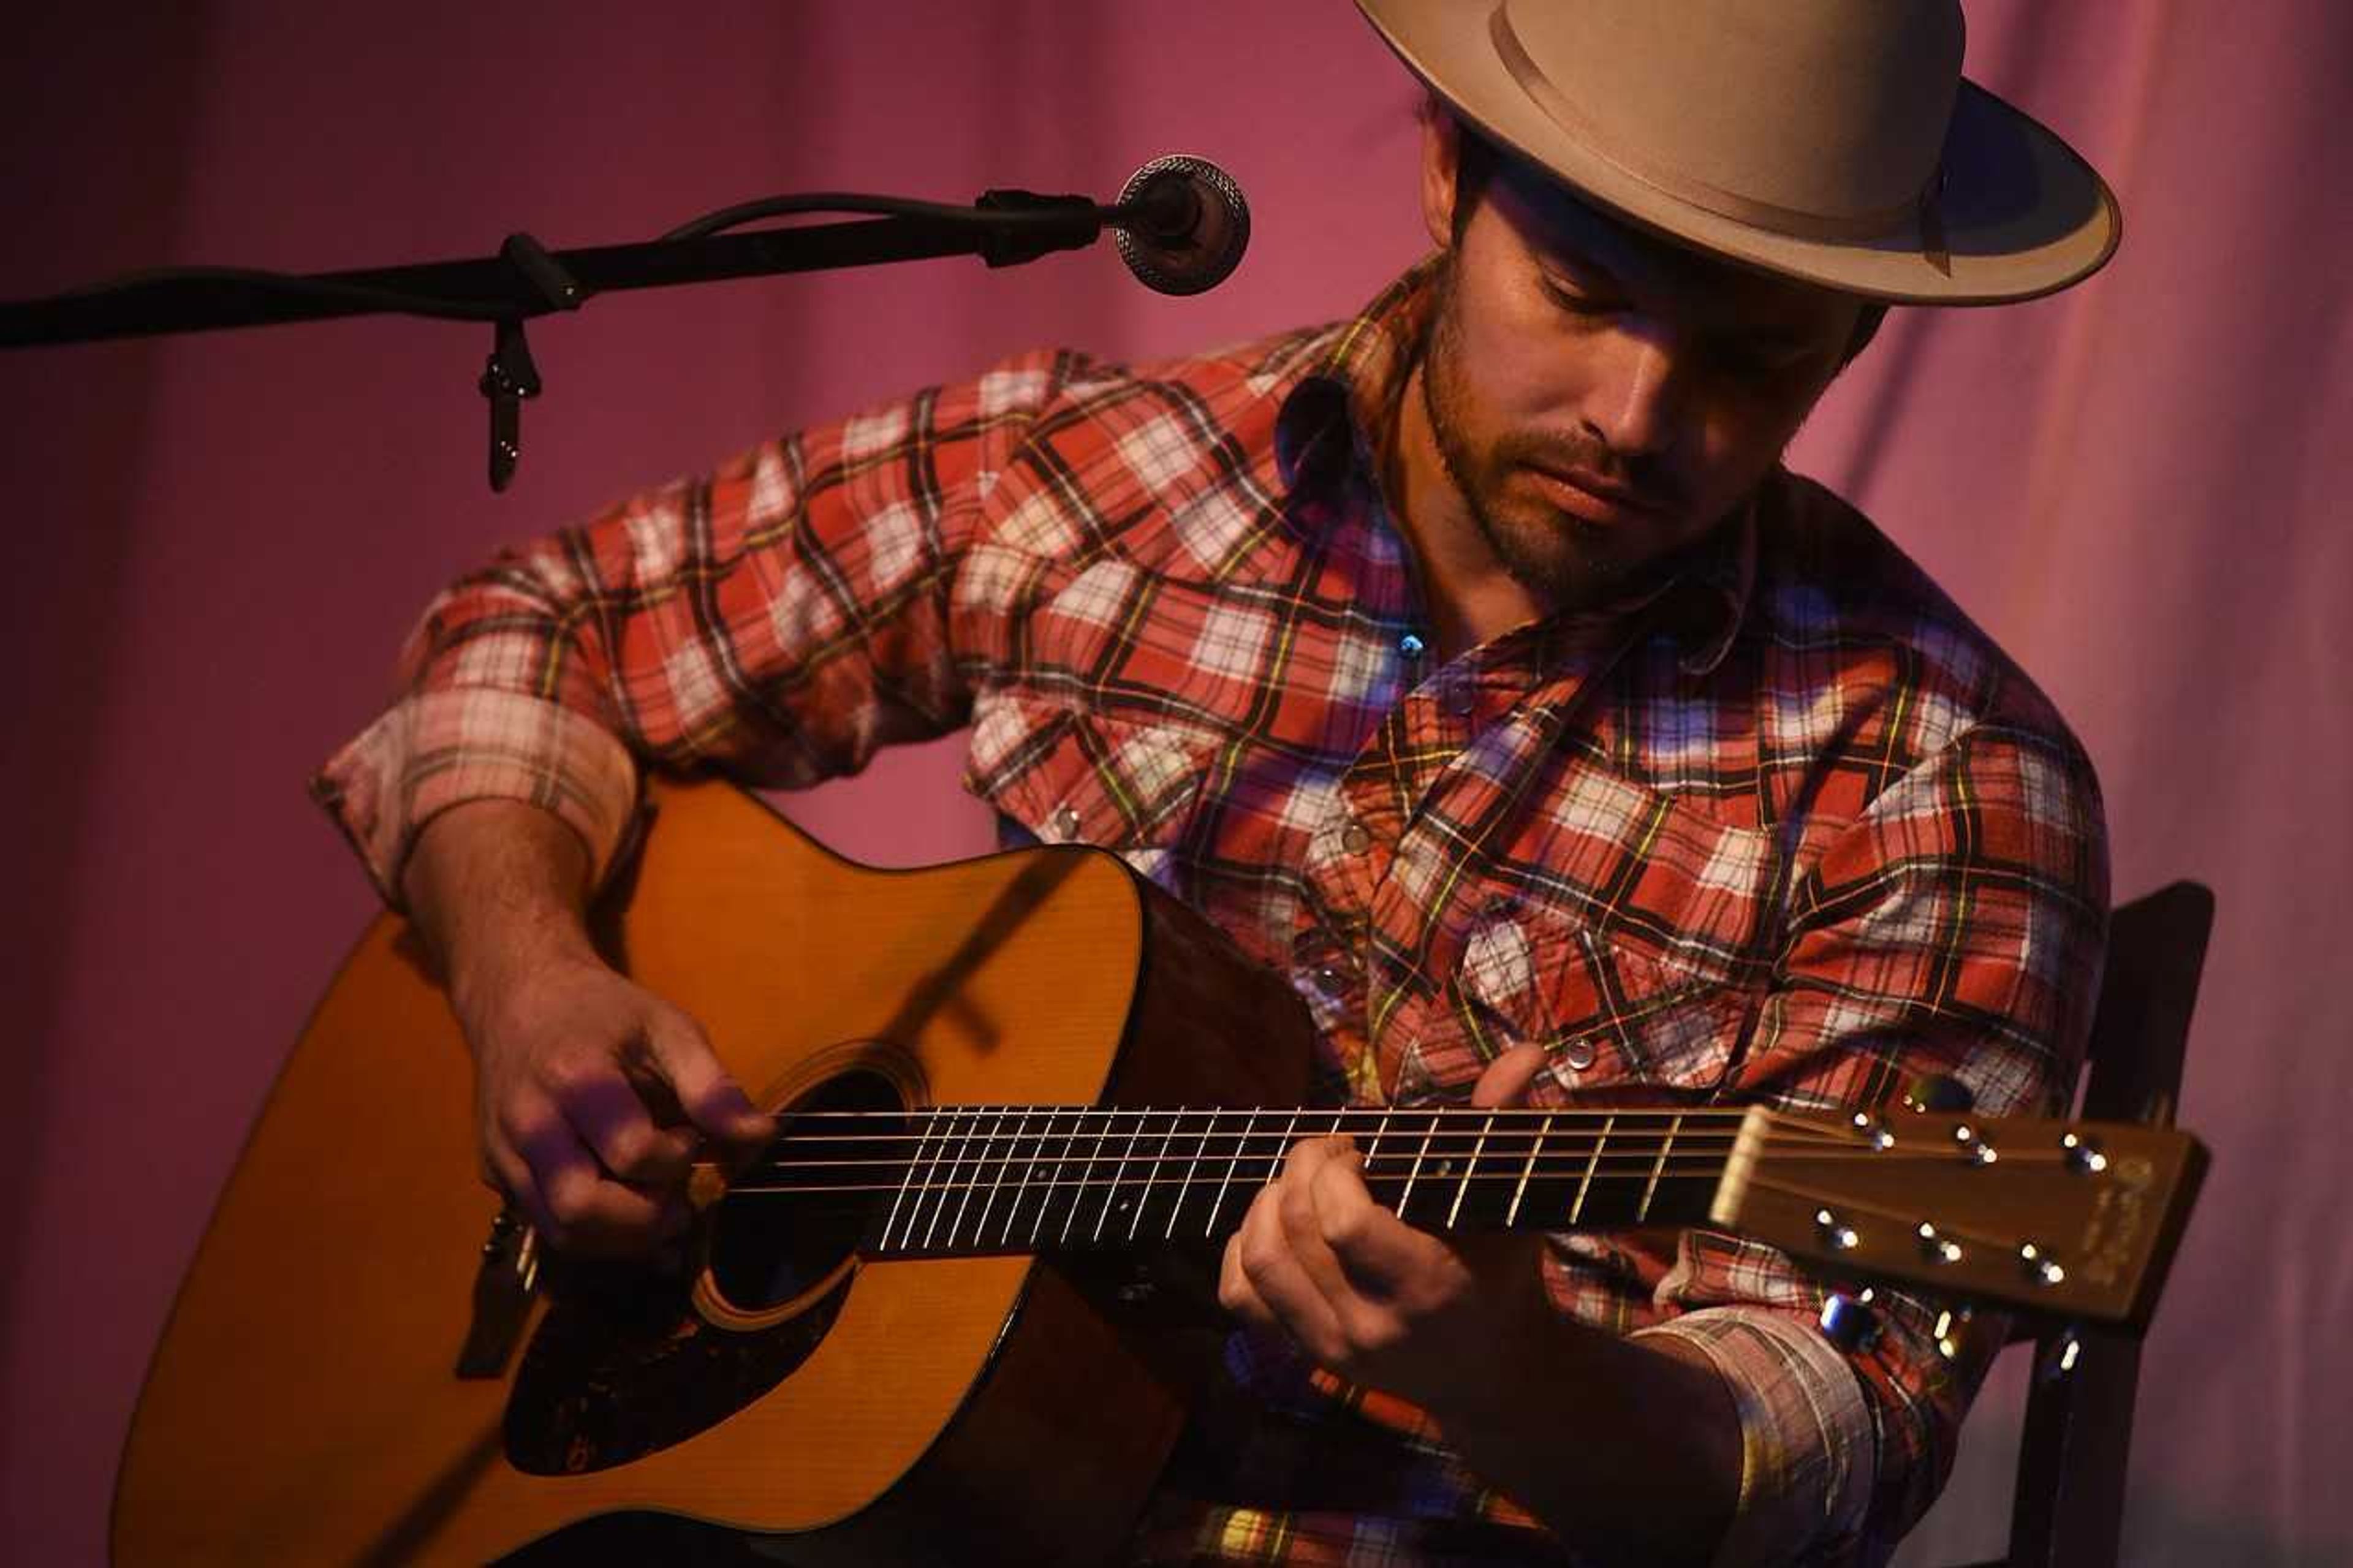 Adam Hellman performs at Sit Down and Shut Up (A Night of Songs) Feb. 6 at Port Cape Yacht Club.